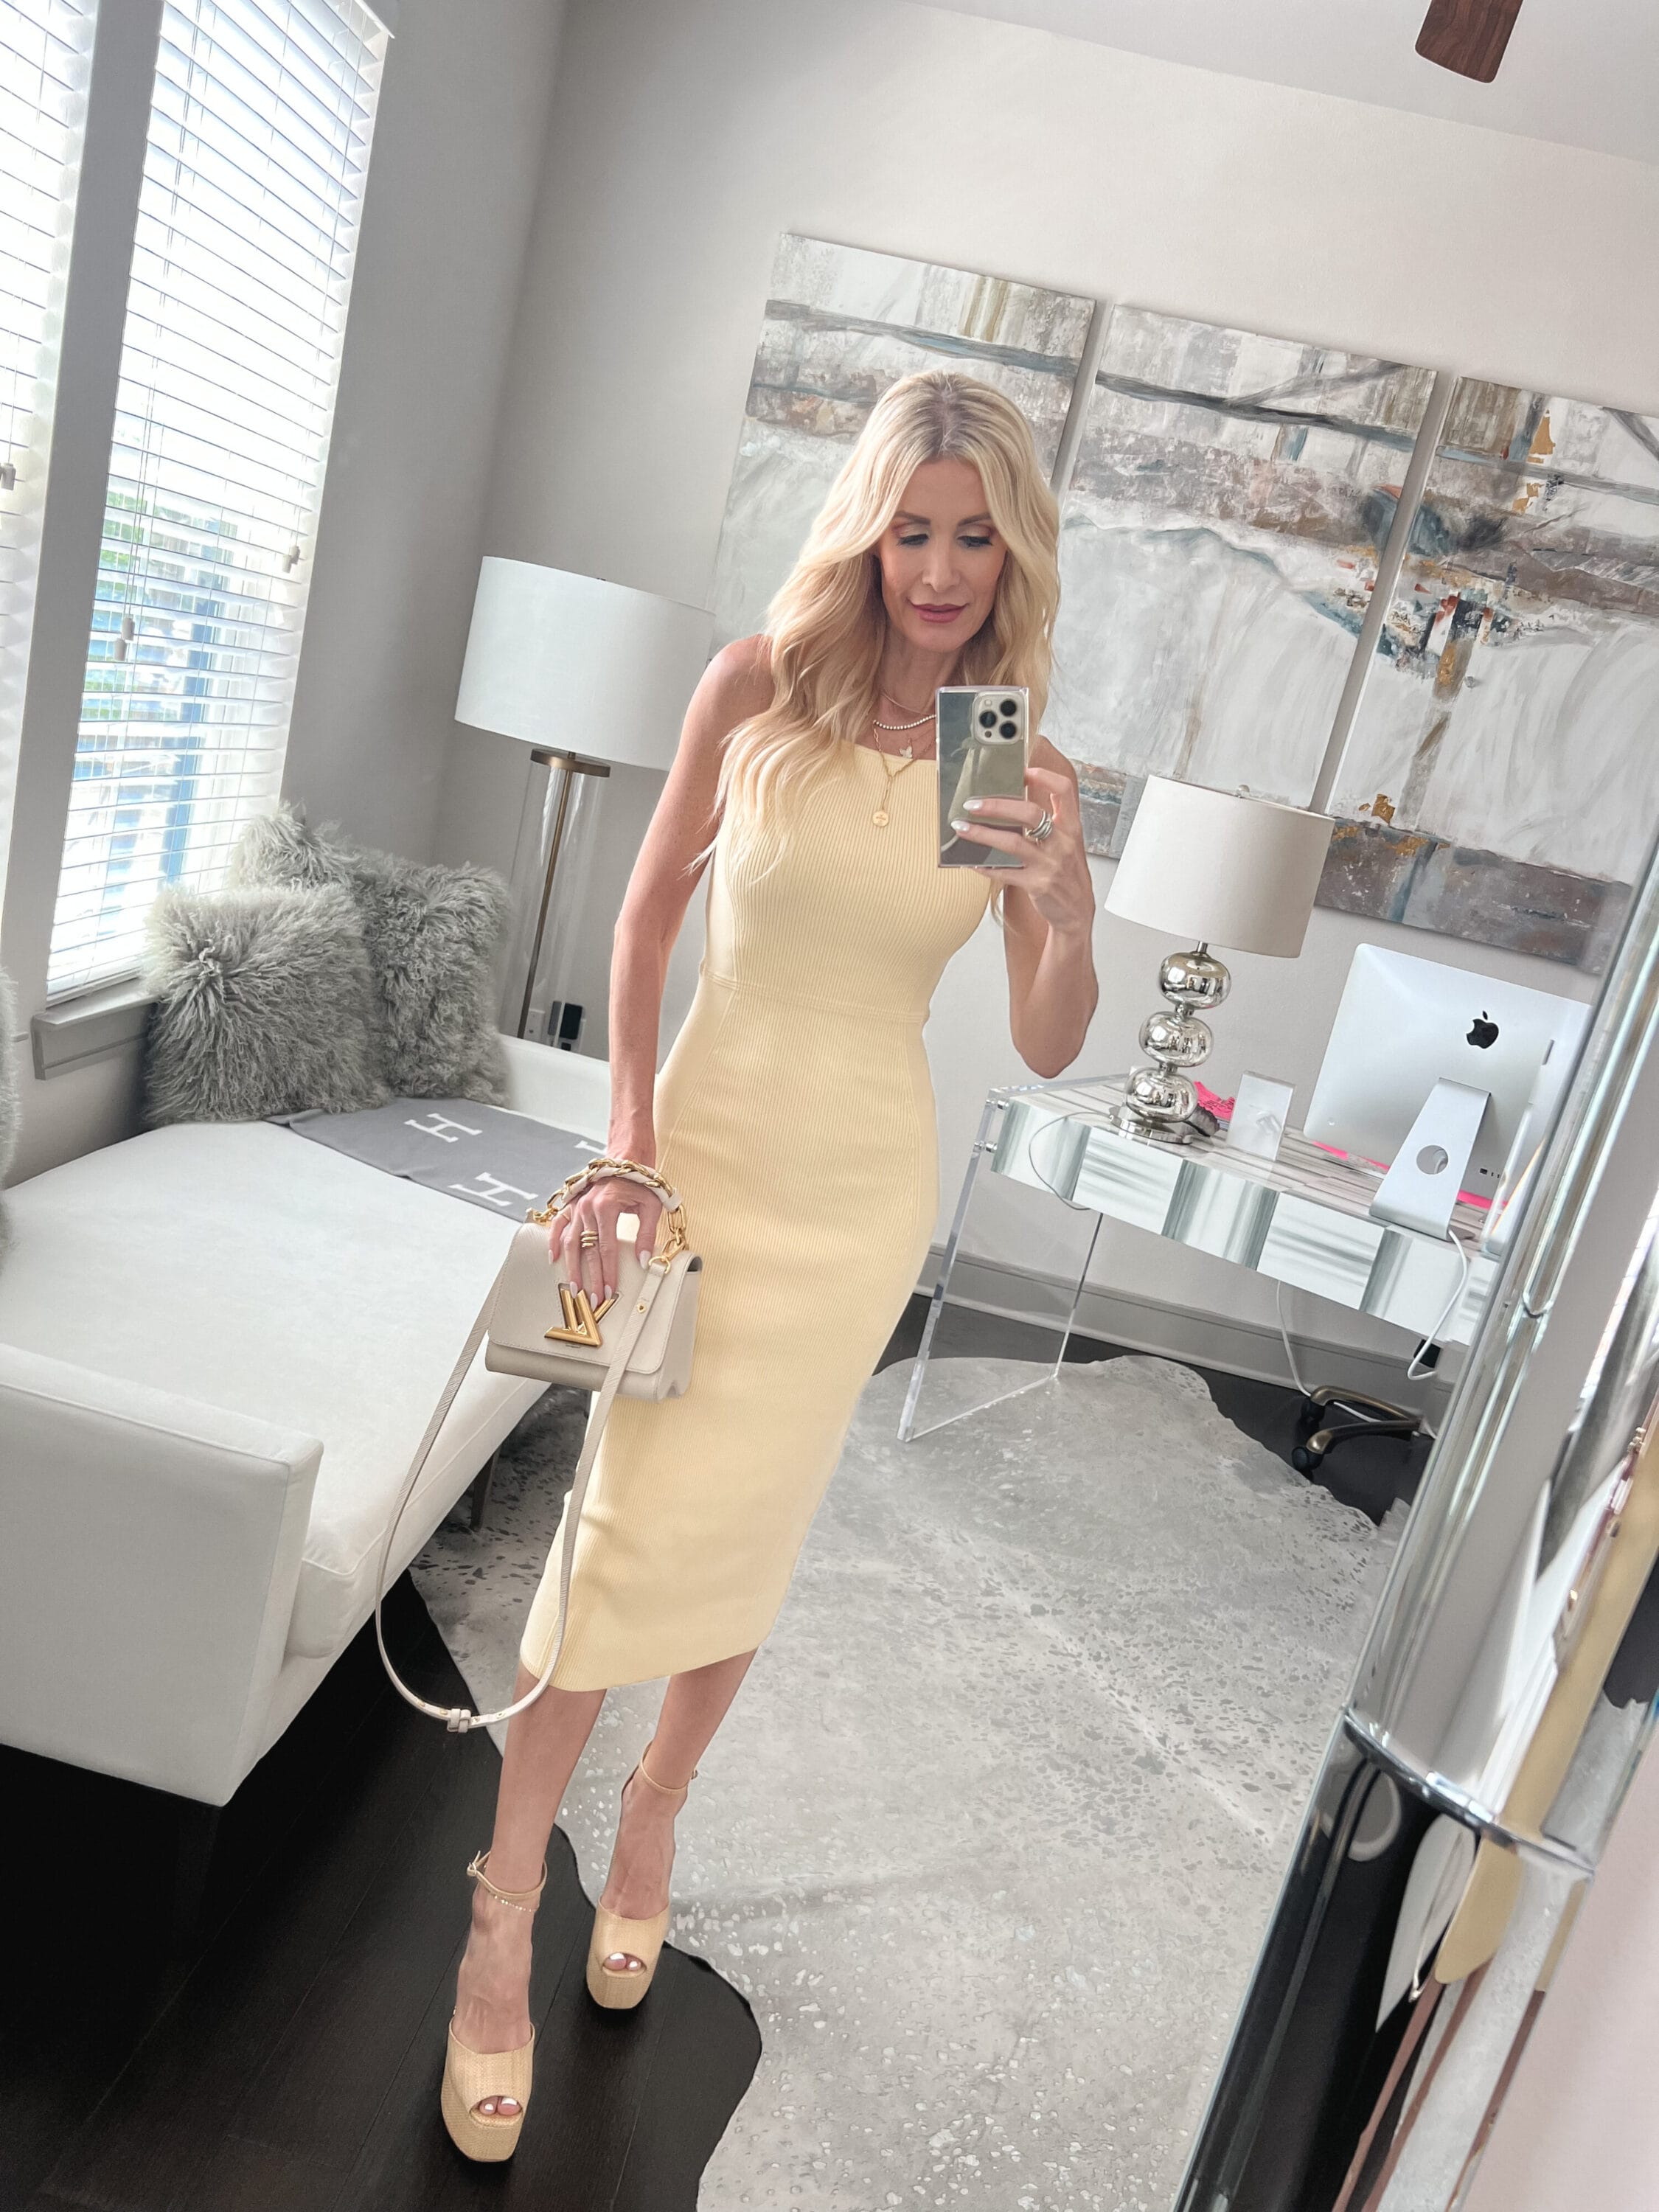 Over 40 fashion icon wears a pastel yellow midi dress with trending platform heels.